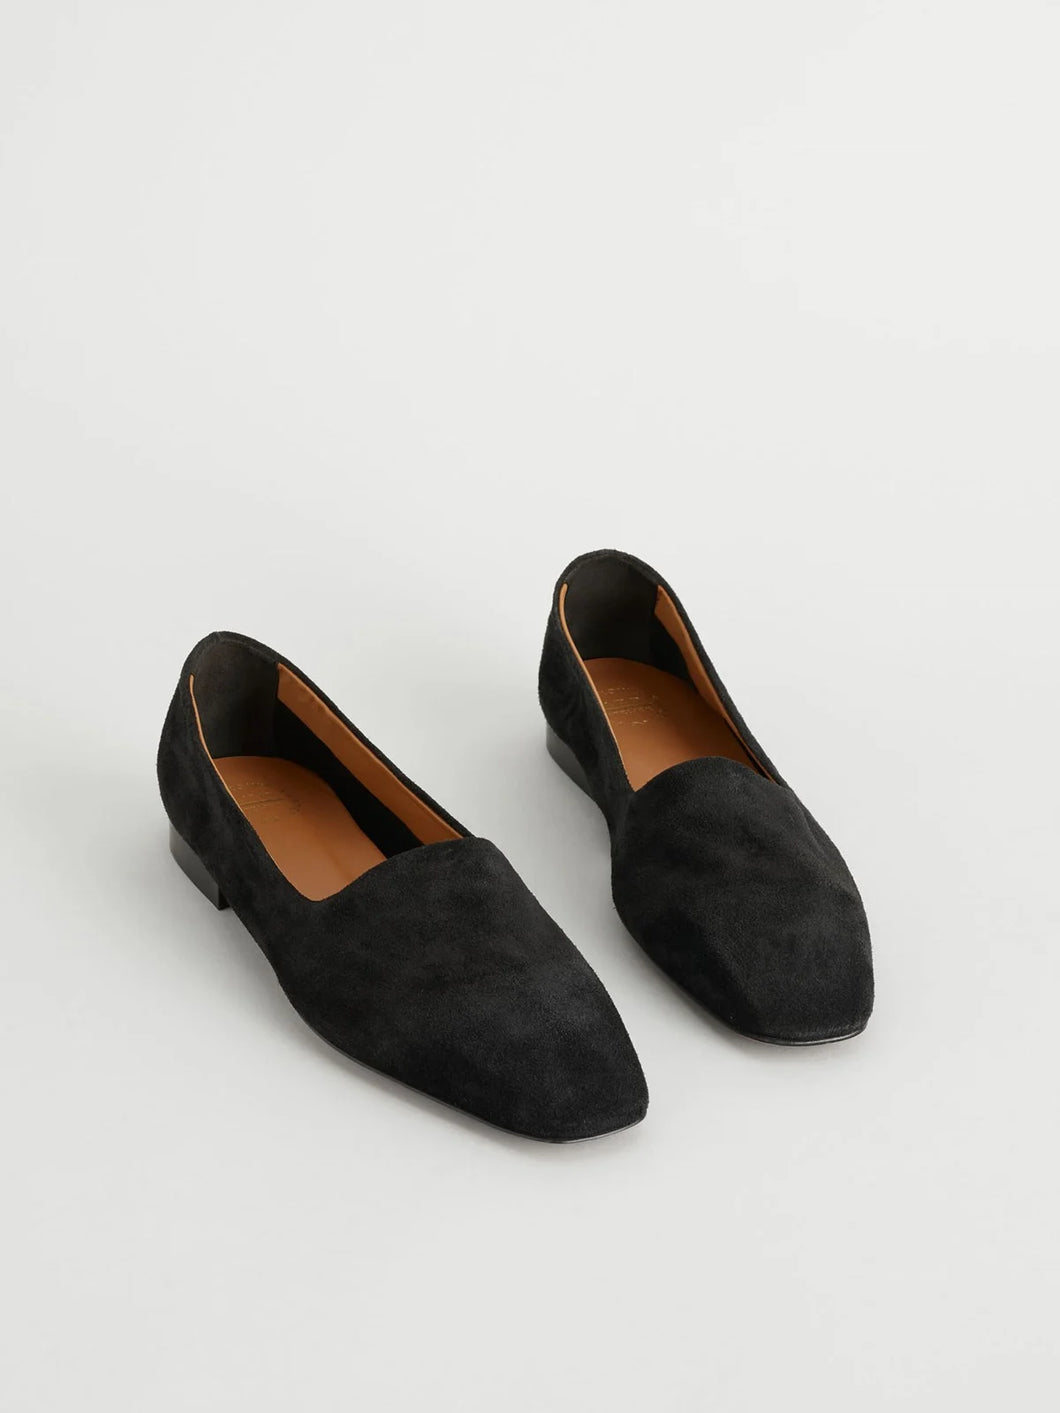 Andrano SUEDE Leather Loafers Black-Shoes-ATP atelier-AKAT studio